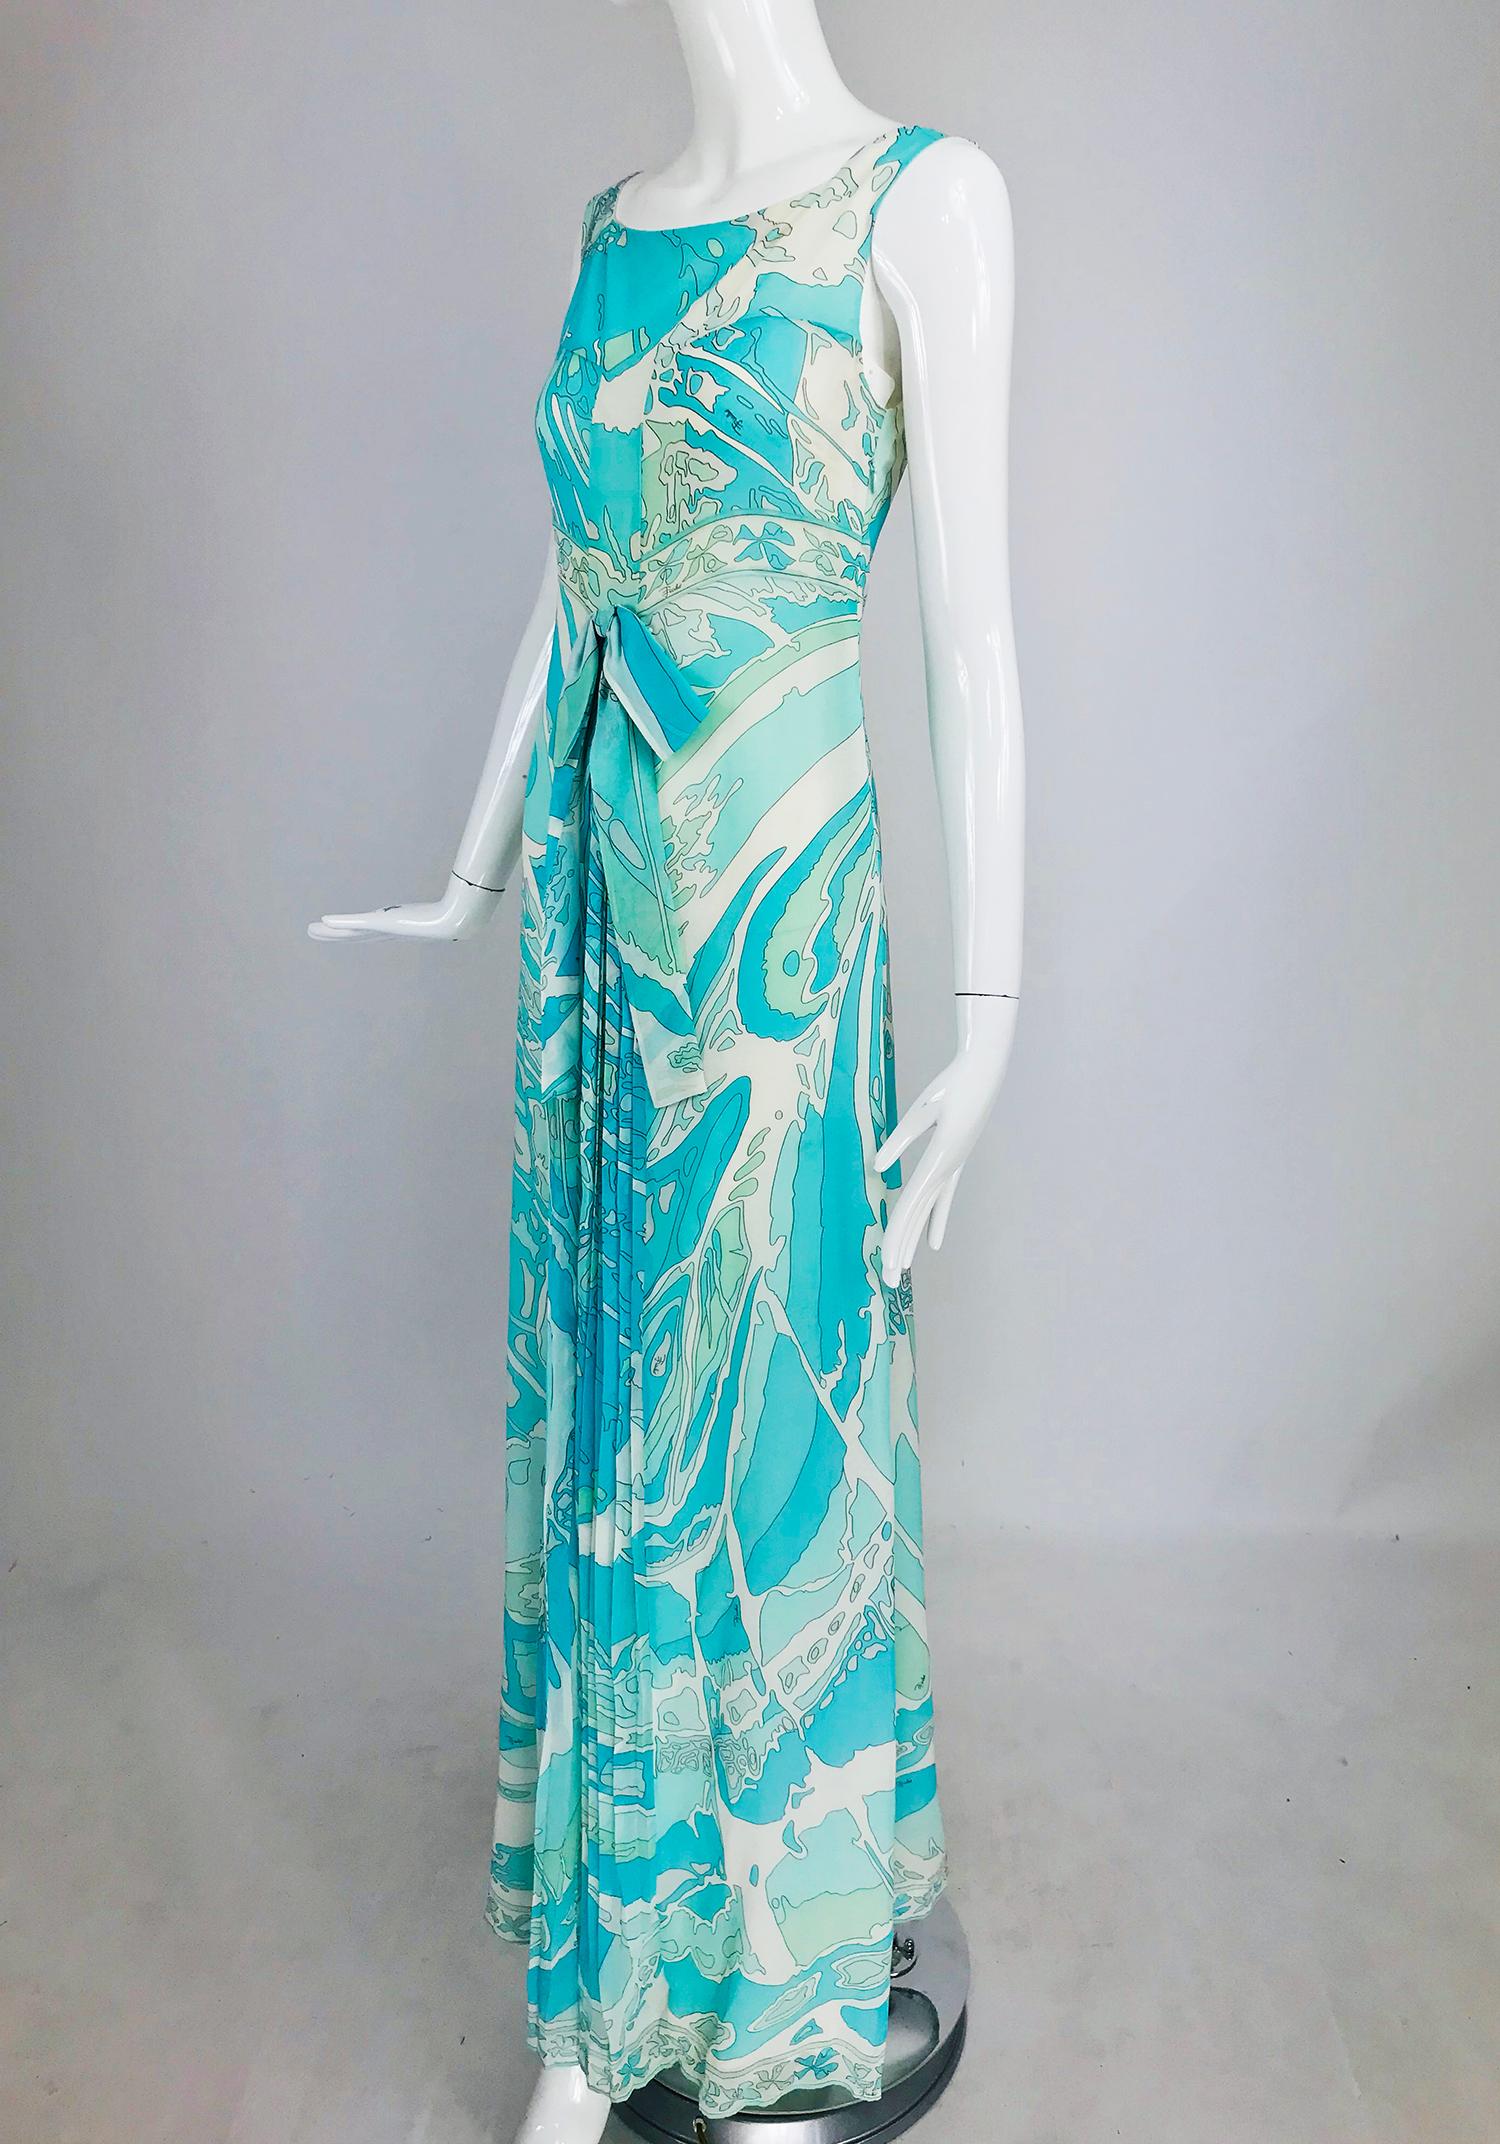 Pucci Aqua Print Silk Chiffon Maxi Dress. Light as air and perfect for summer this gorgeous dress is done in shades of turquoise and aqua blue with off white and ivory. Slip style dress flows to the hem in an A line shape. At the waist front there